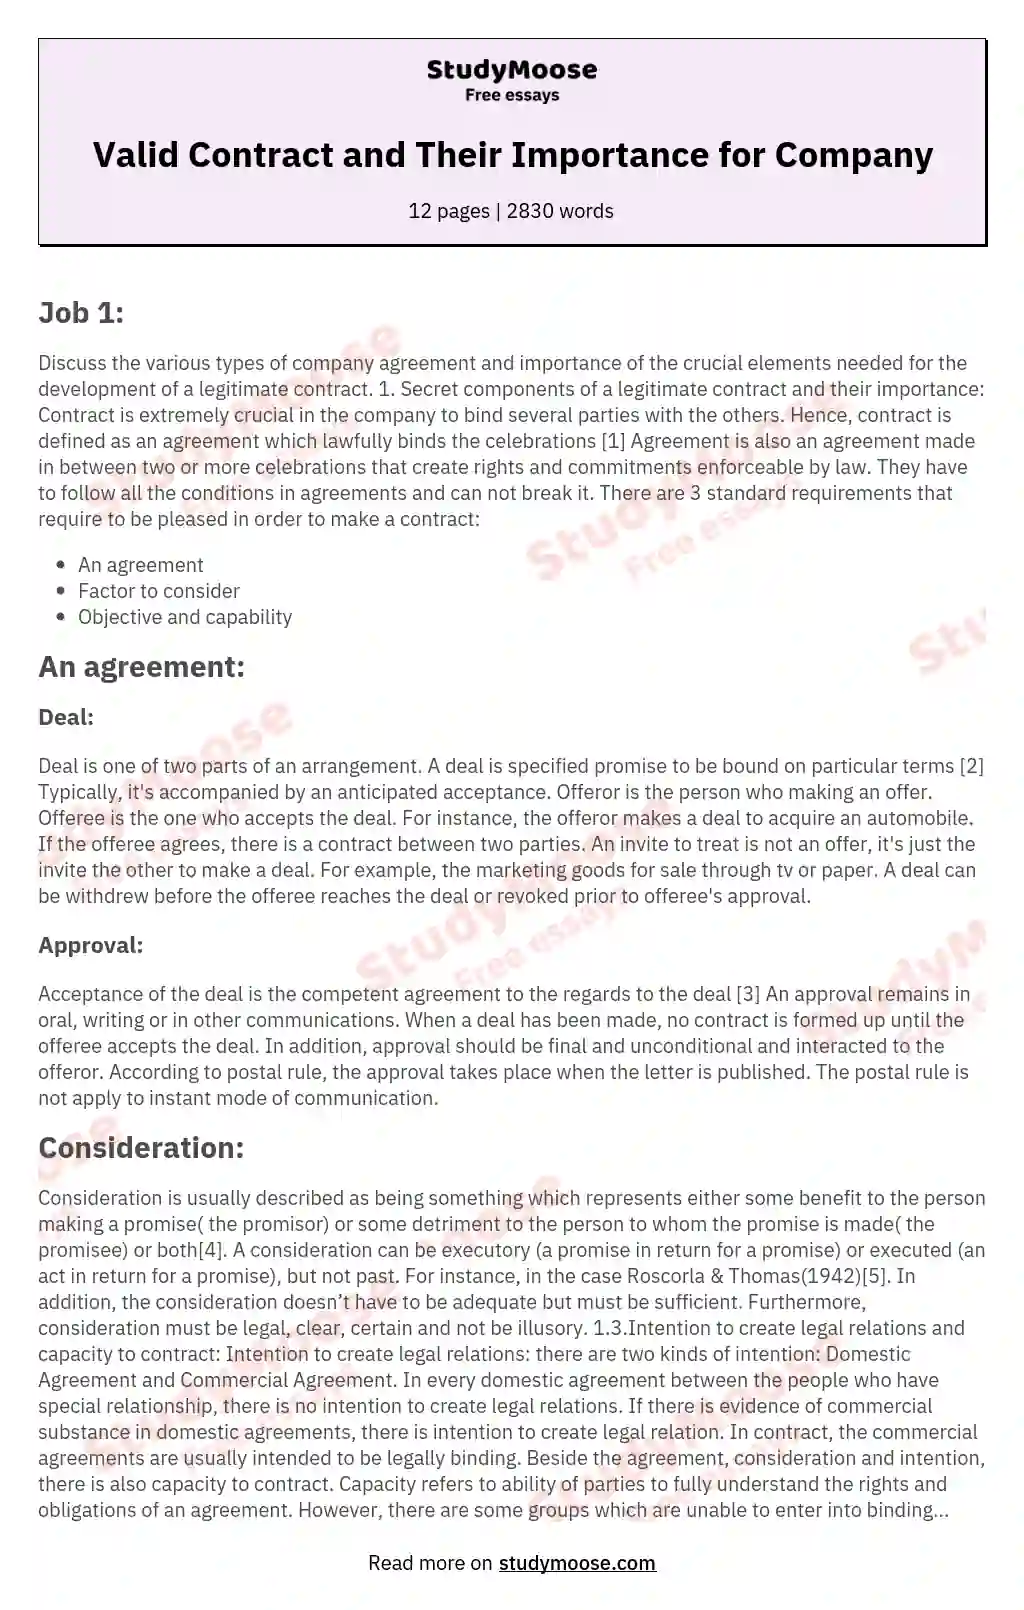 Valid Contract and Their Importance for Company essay